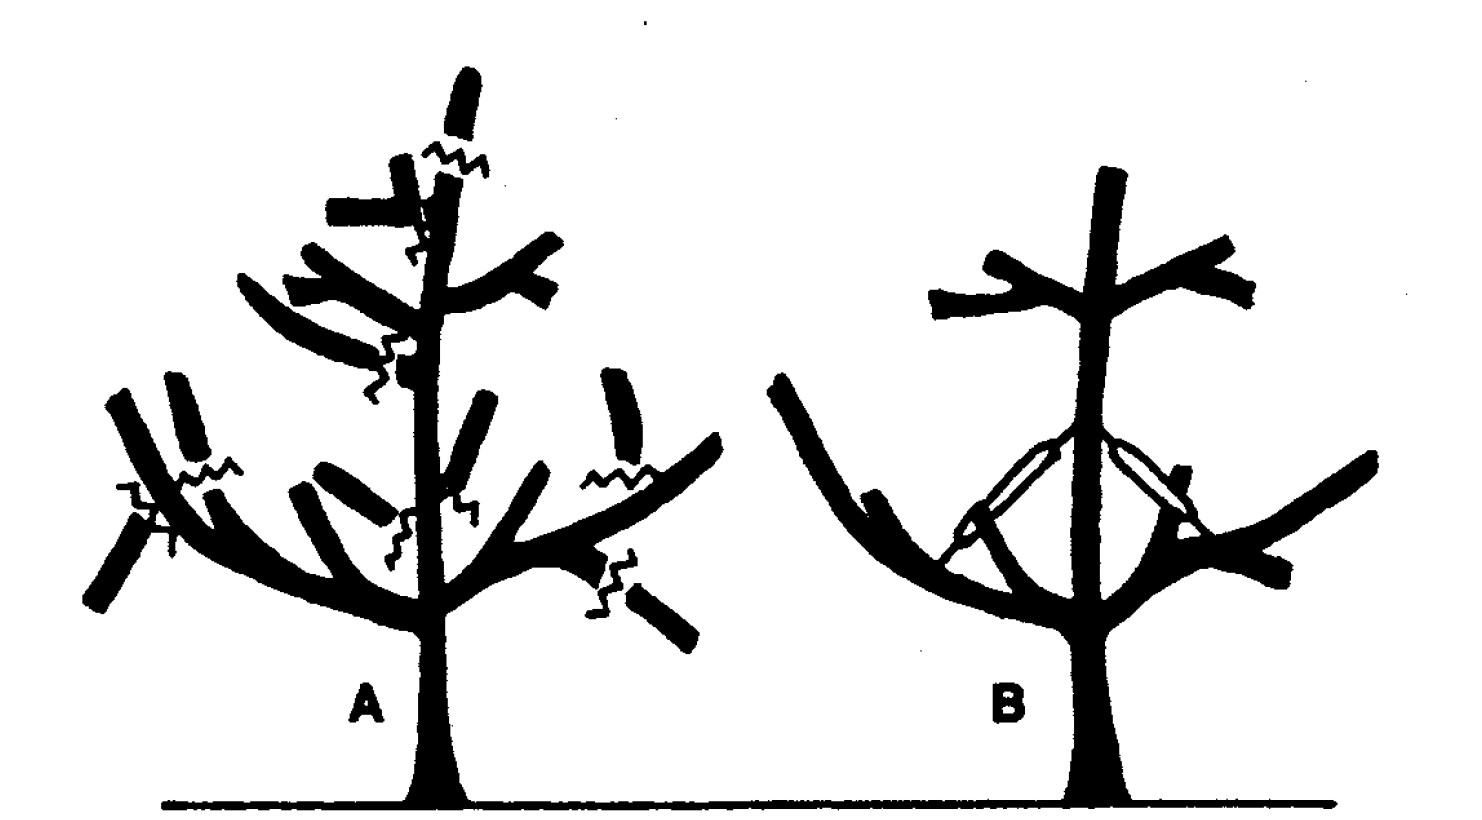 An Illustration showing two year old trees before and after pruning